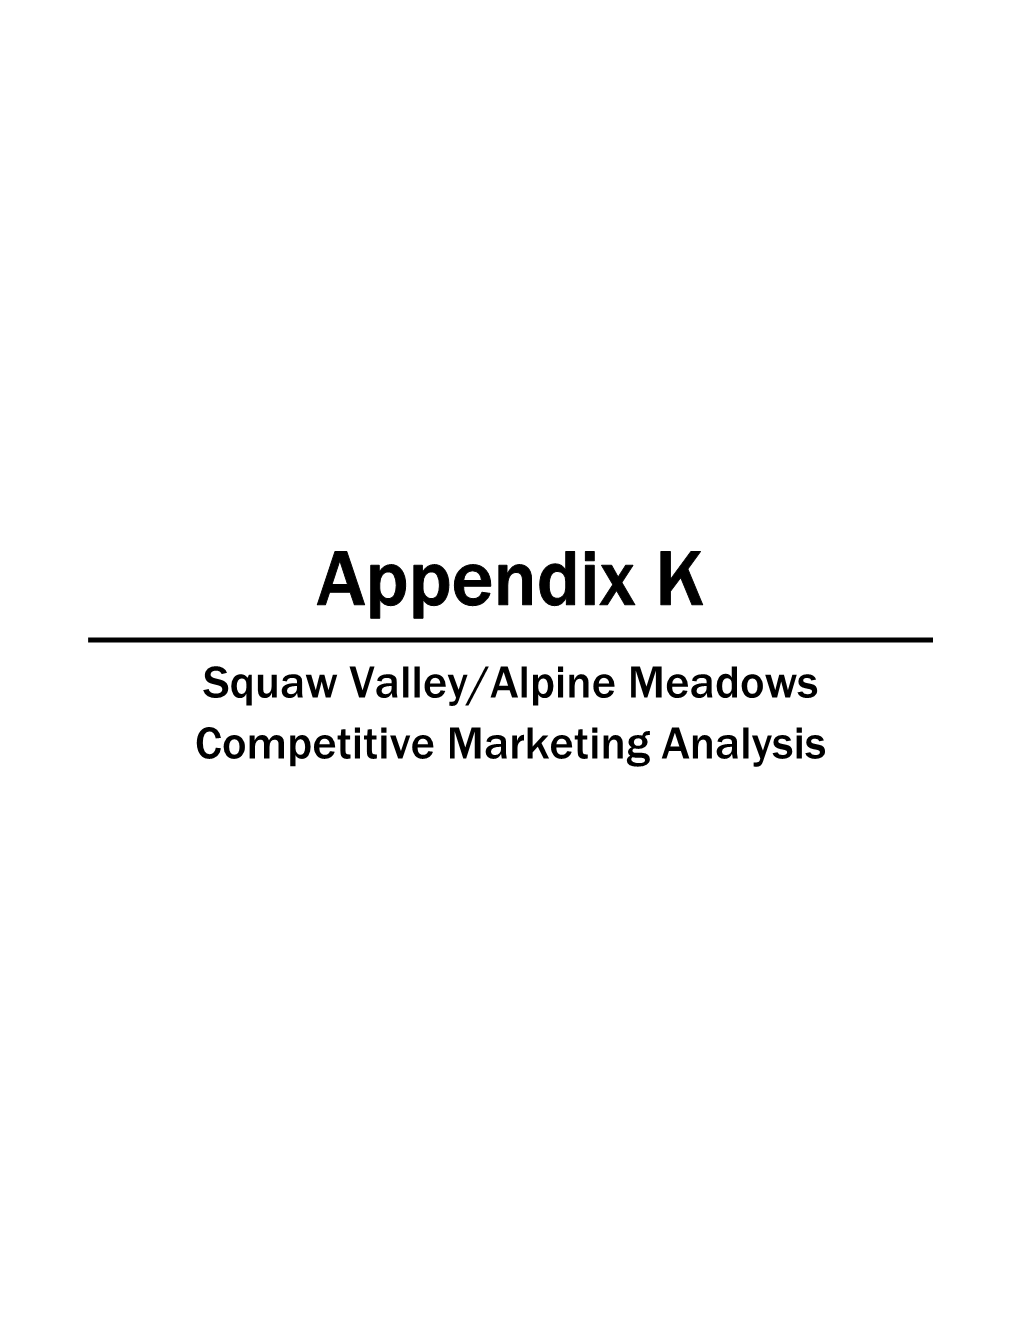 Appendix K Squaw Valley/Alpine Meadows Competitive Marketing Analysis